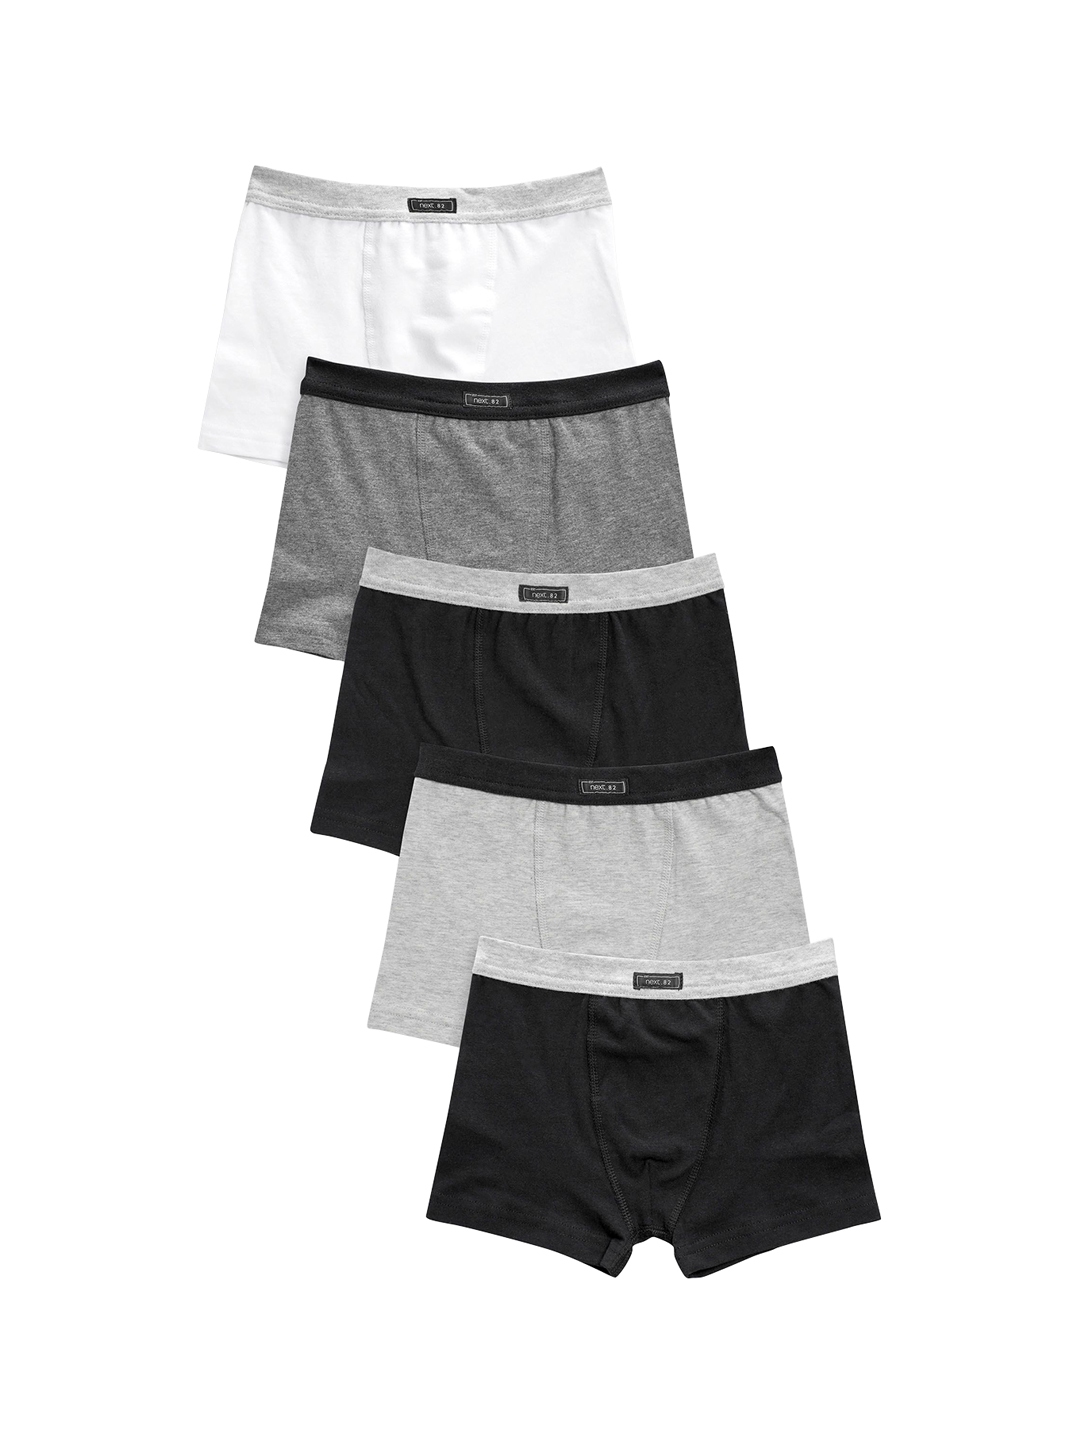 Buy Next Boys Pack Of 5 Solid Trunks 5057823317001 - Trunk for Boys ...